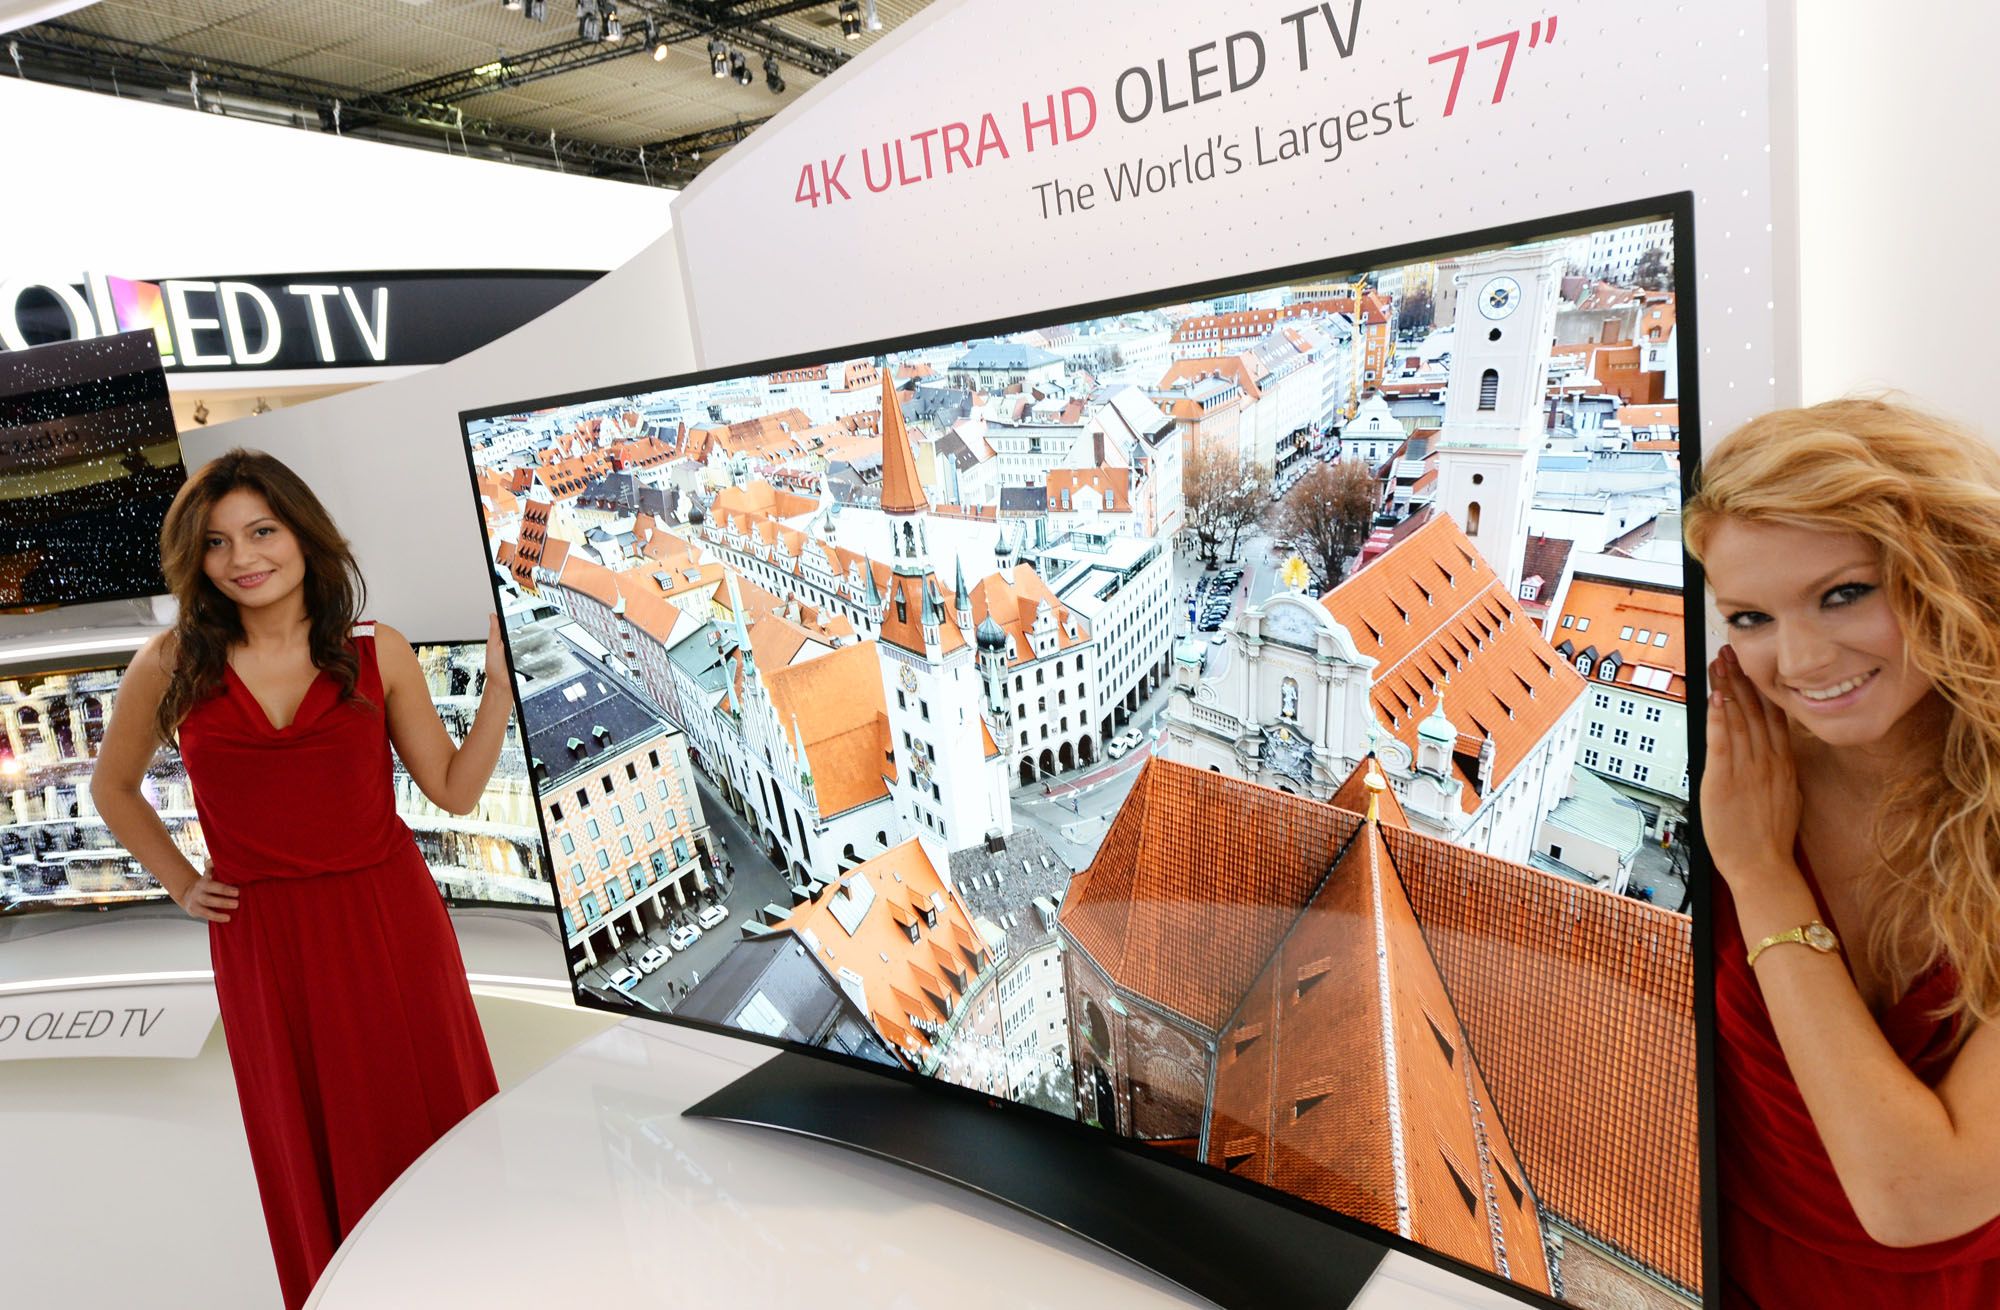 lg shows off curved 77 inch 4k ultra hd oled tv at ifa 2013 image 1